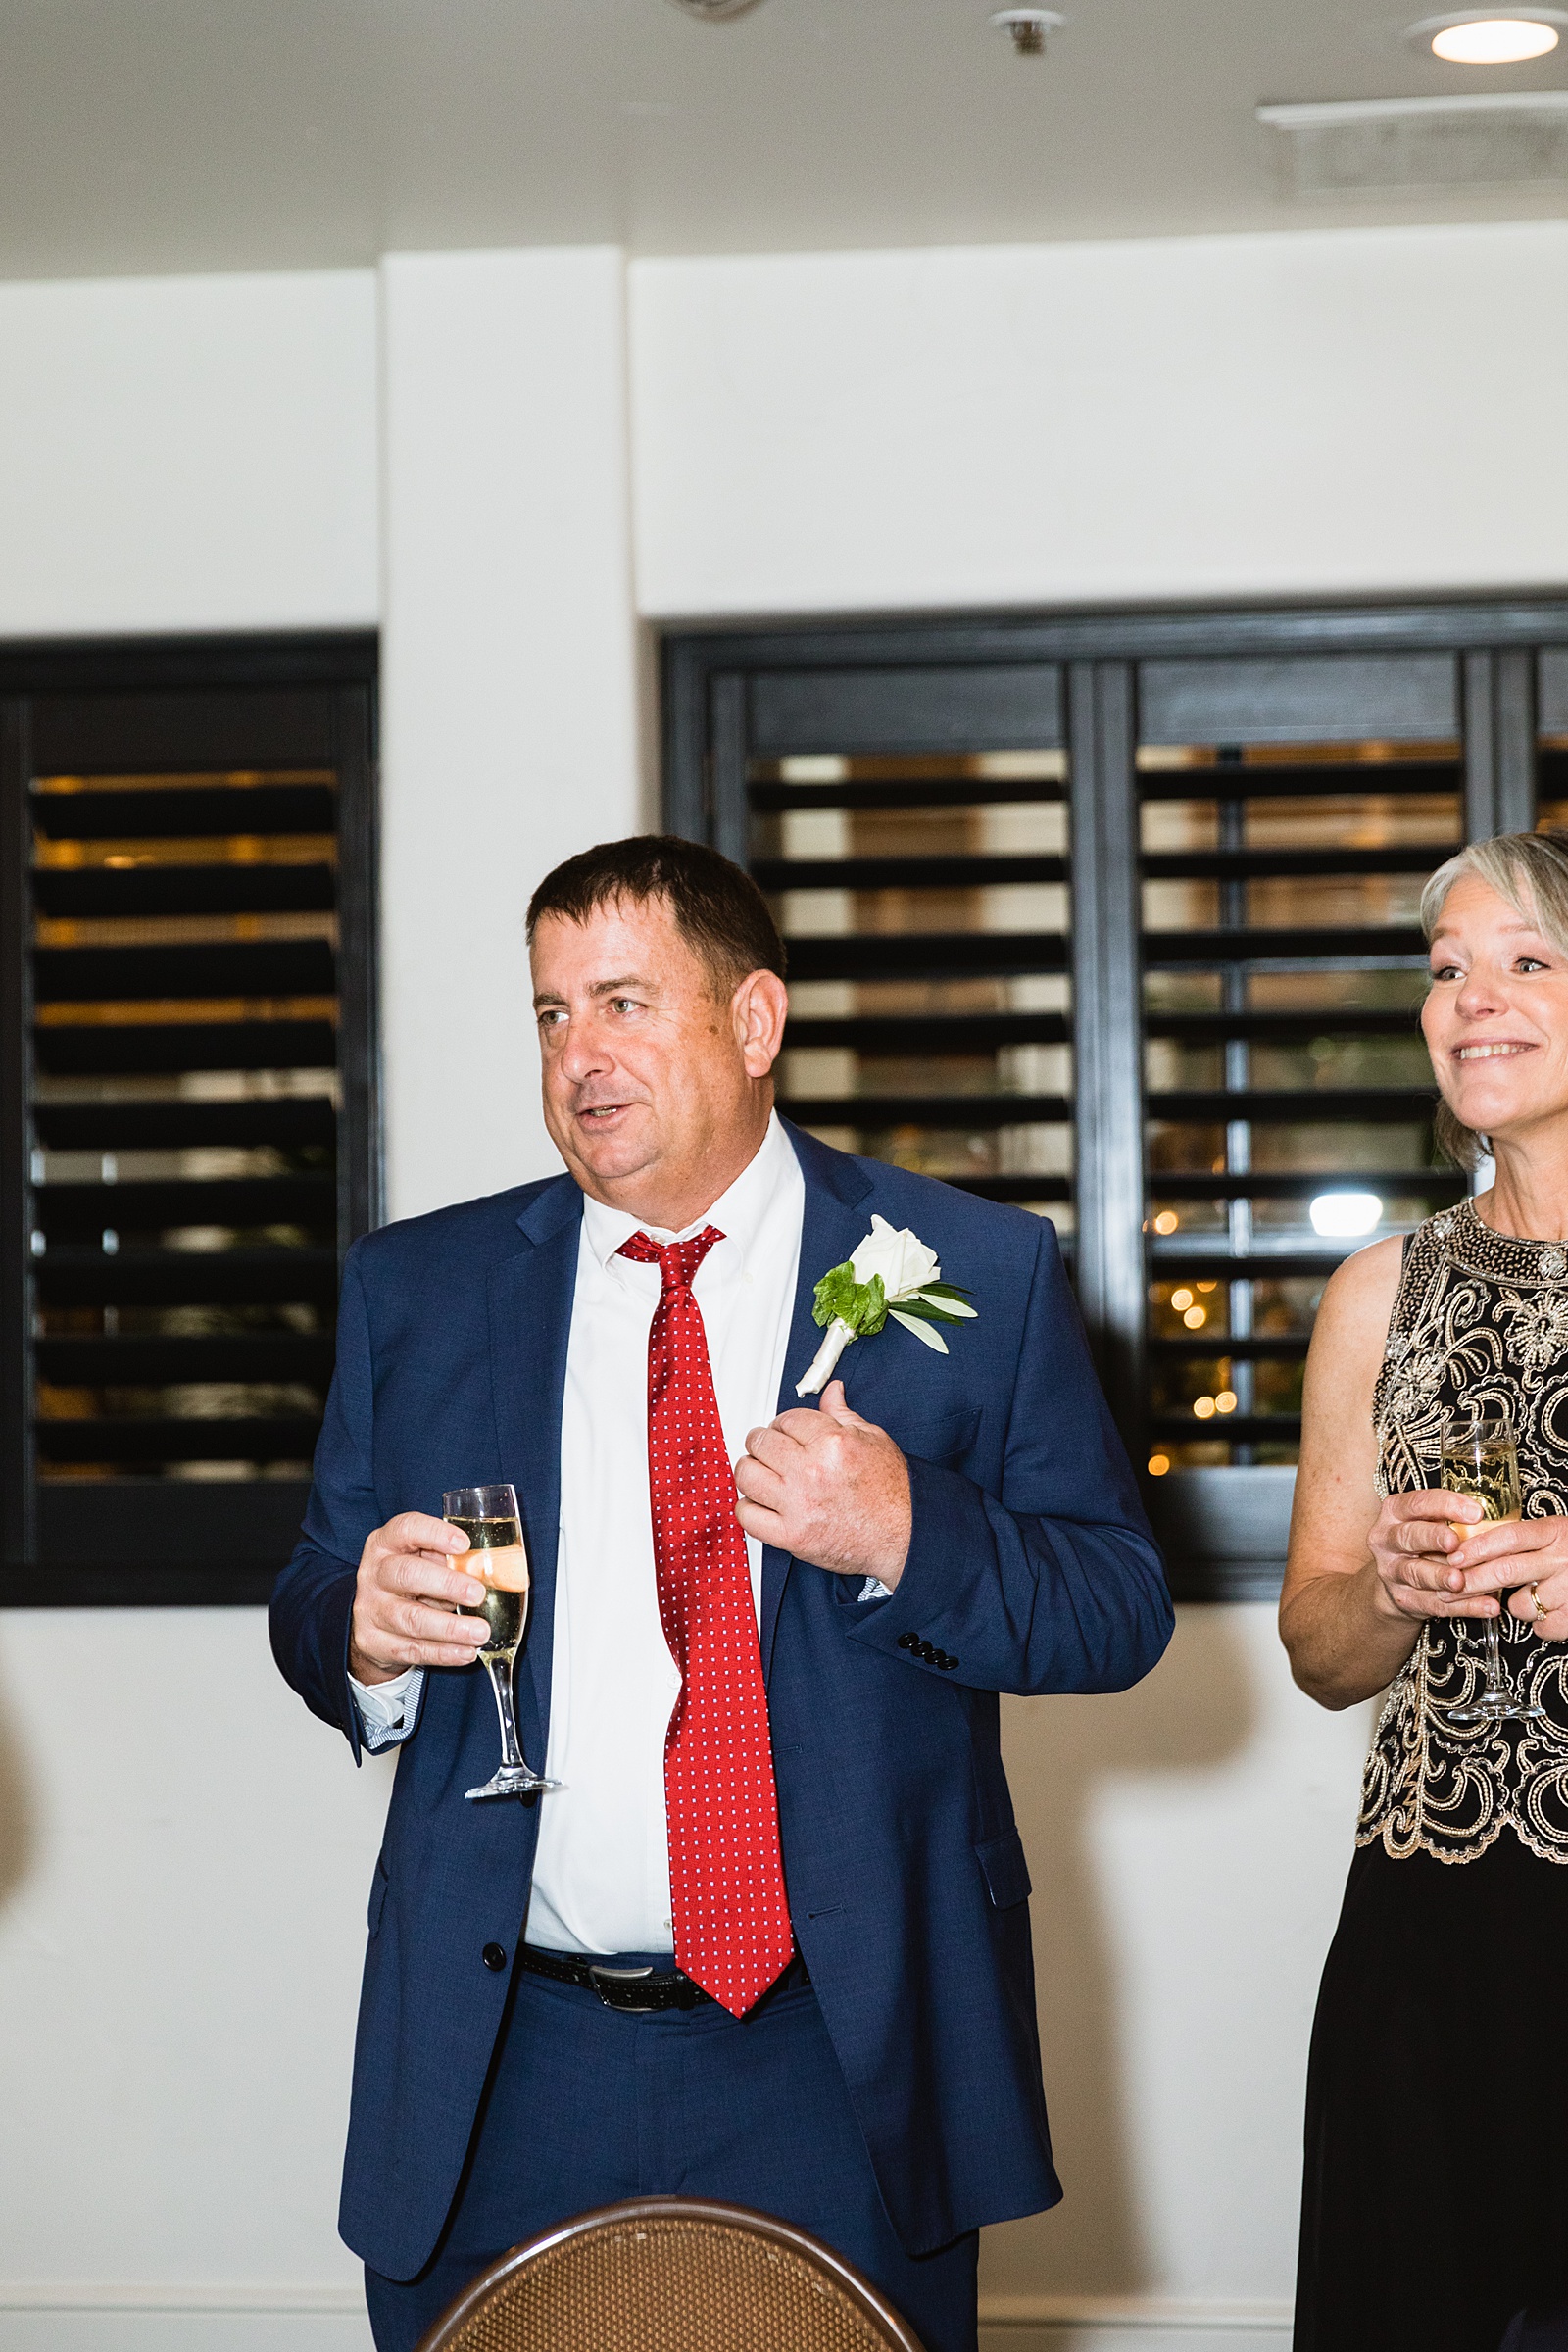 Guests make a toast at The Scott wedding reception by Scottsdale wedding photographer PMA Photography